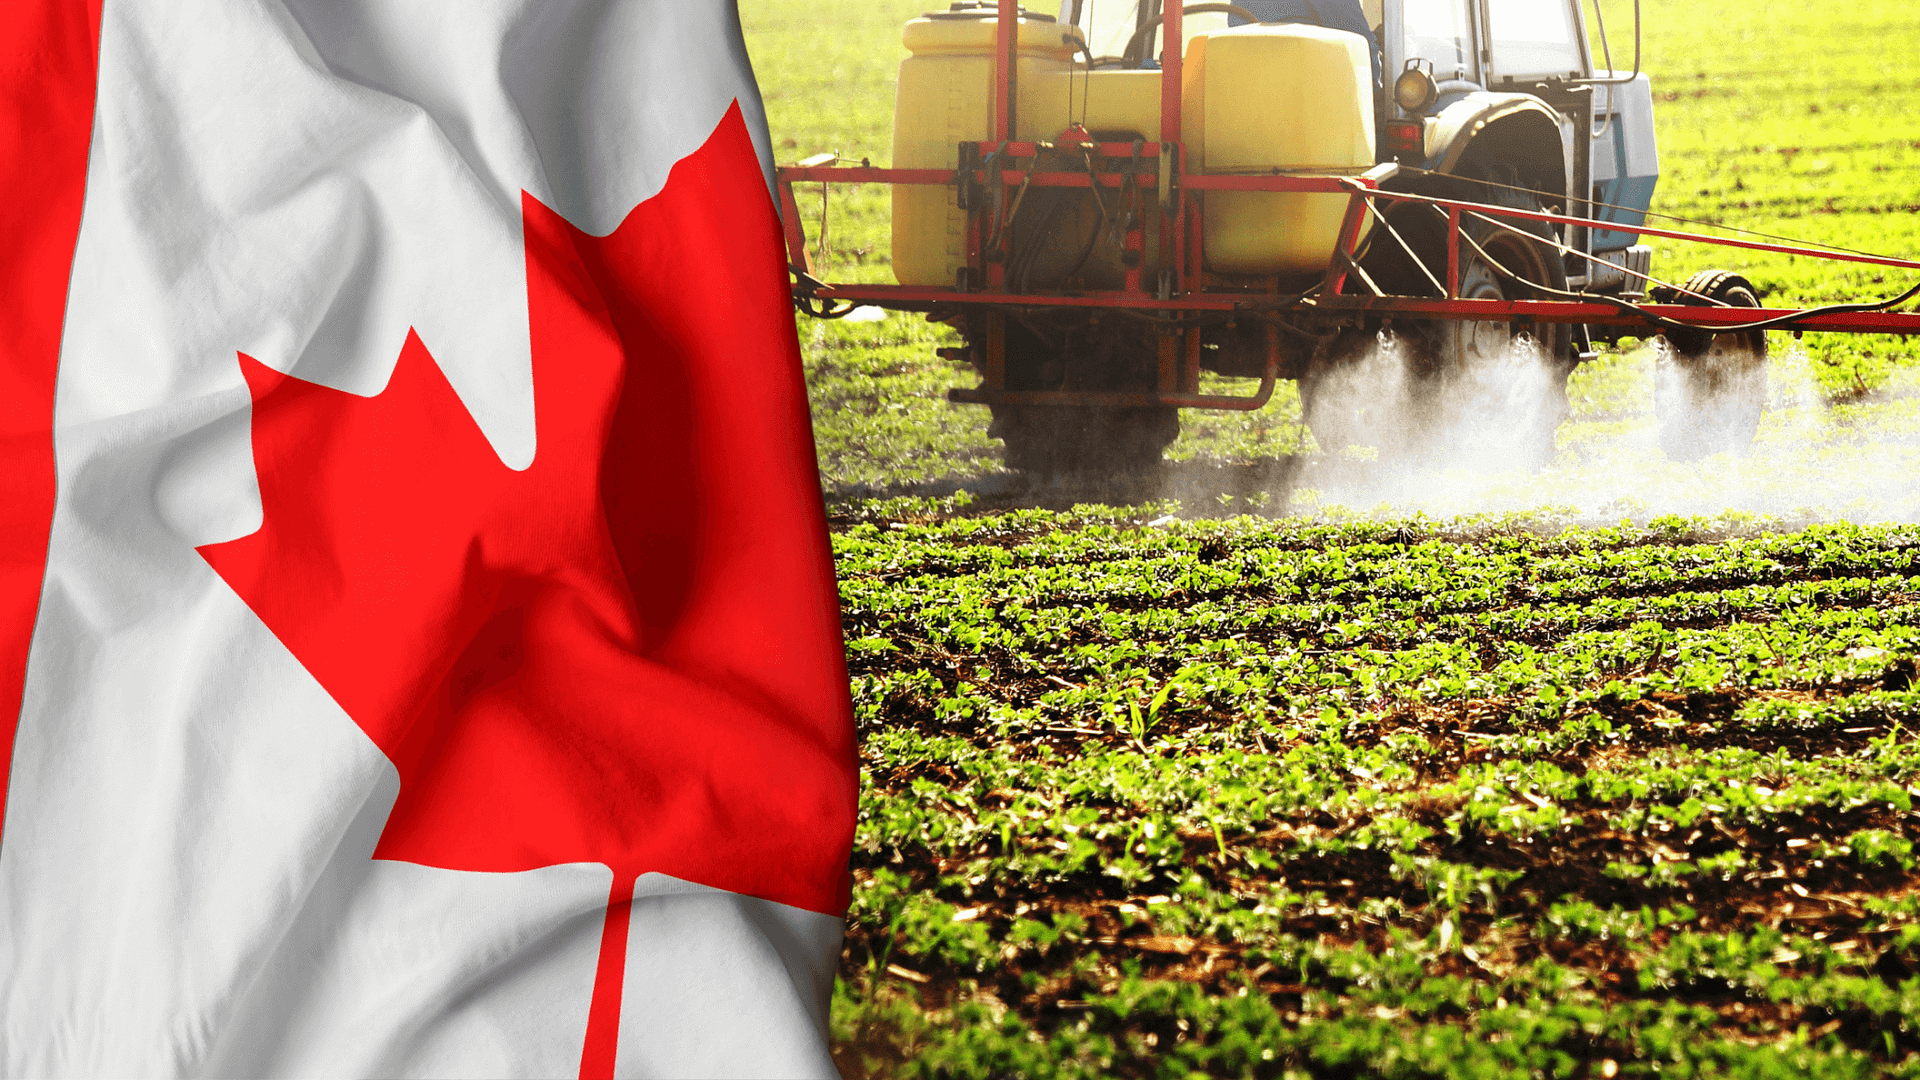 Do you want to sell pesticides in Canada? Then here is what you need to know about the regulation process.